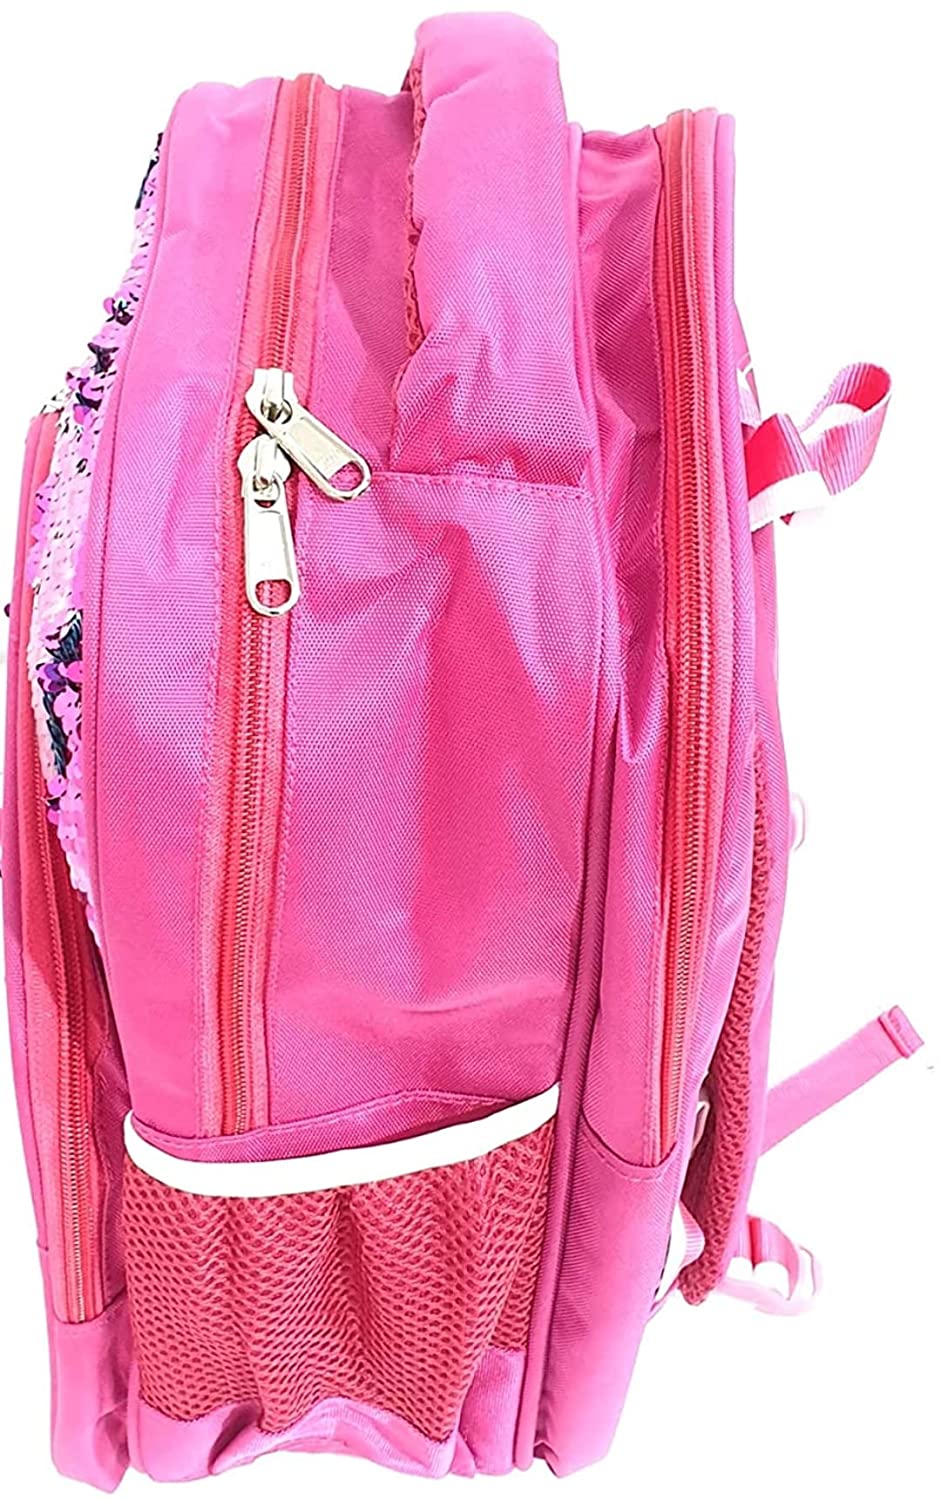 SAFESEED Unicorn Round Sling Bag Purse Clutch Wallet Handbag for kids Girls  US129 at Rs 193 | Sling Bag in Chennai | ID: 25678842948